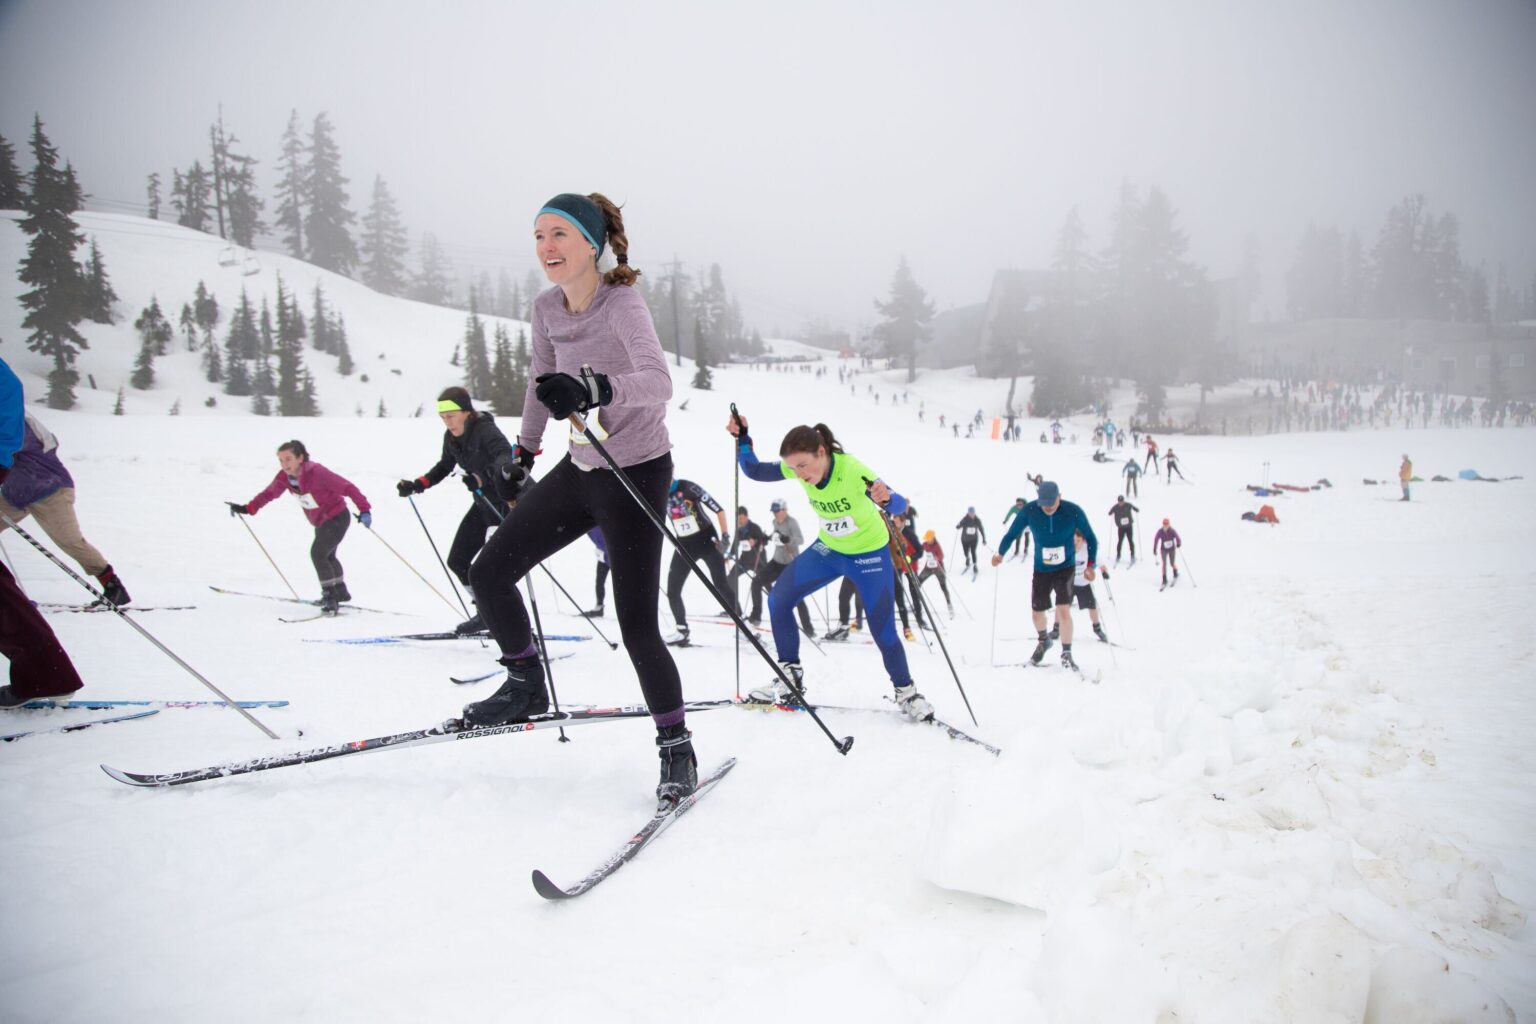 Elizabeth Watters from The Lost Canoe team climbs a hill in the cross-country ski leg of the Ski to Sea race on May 29